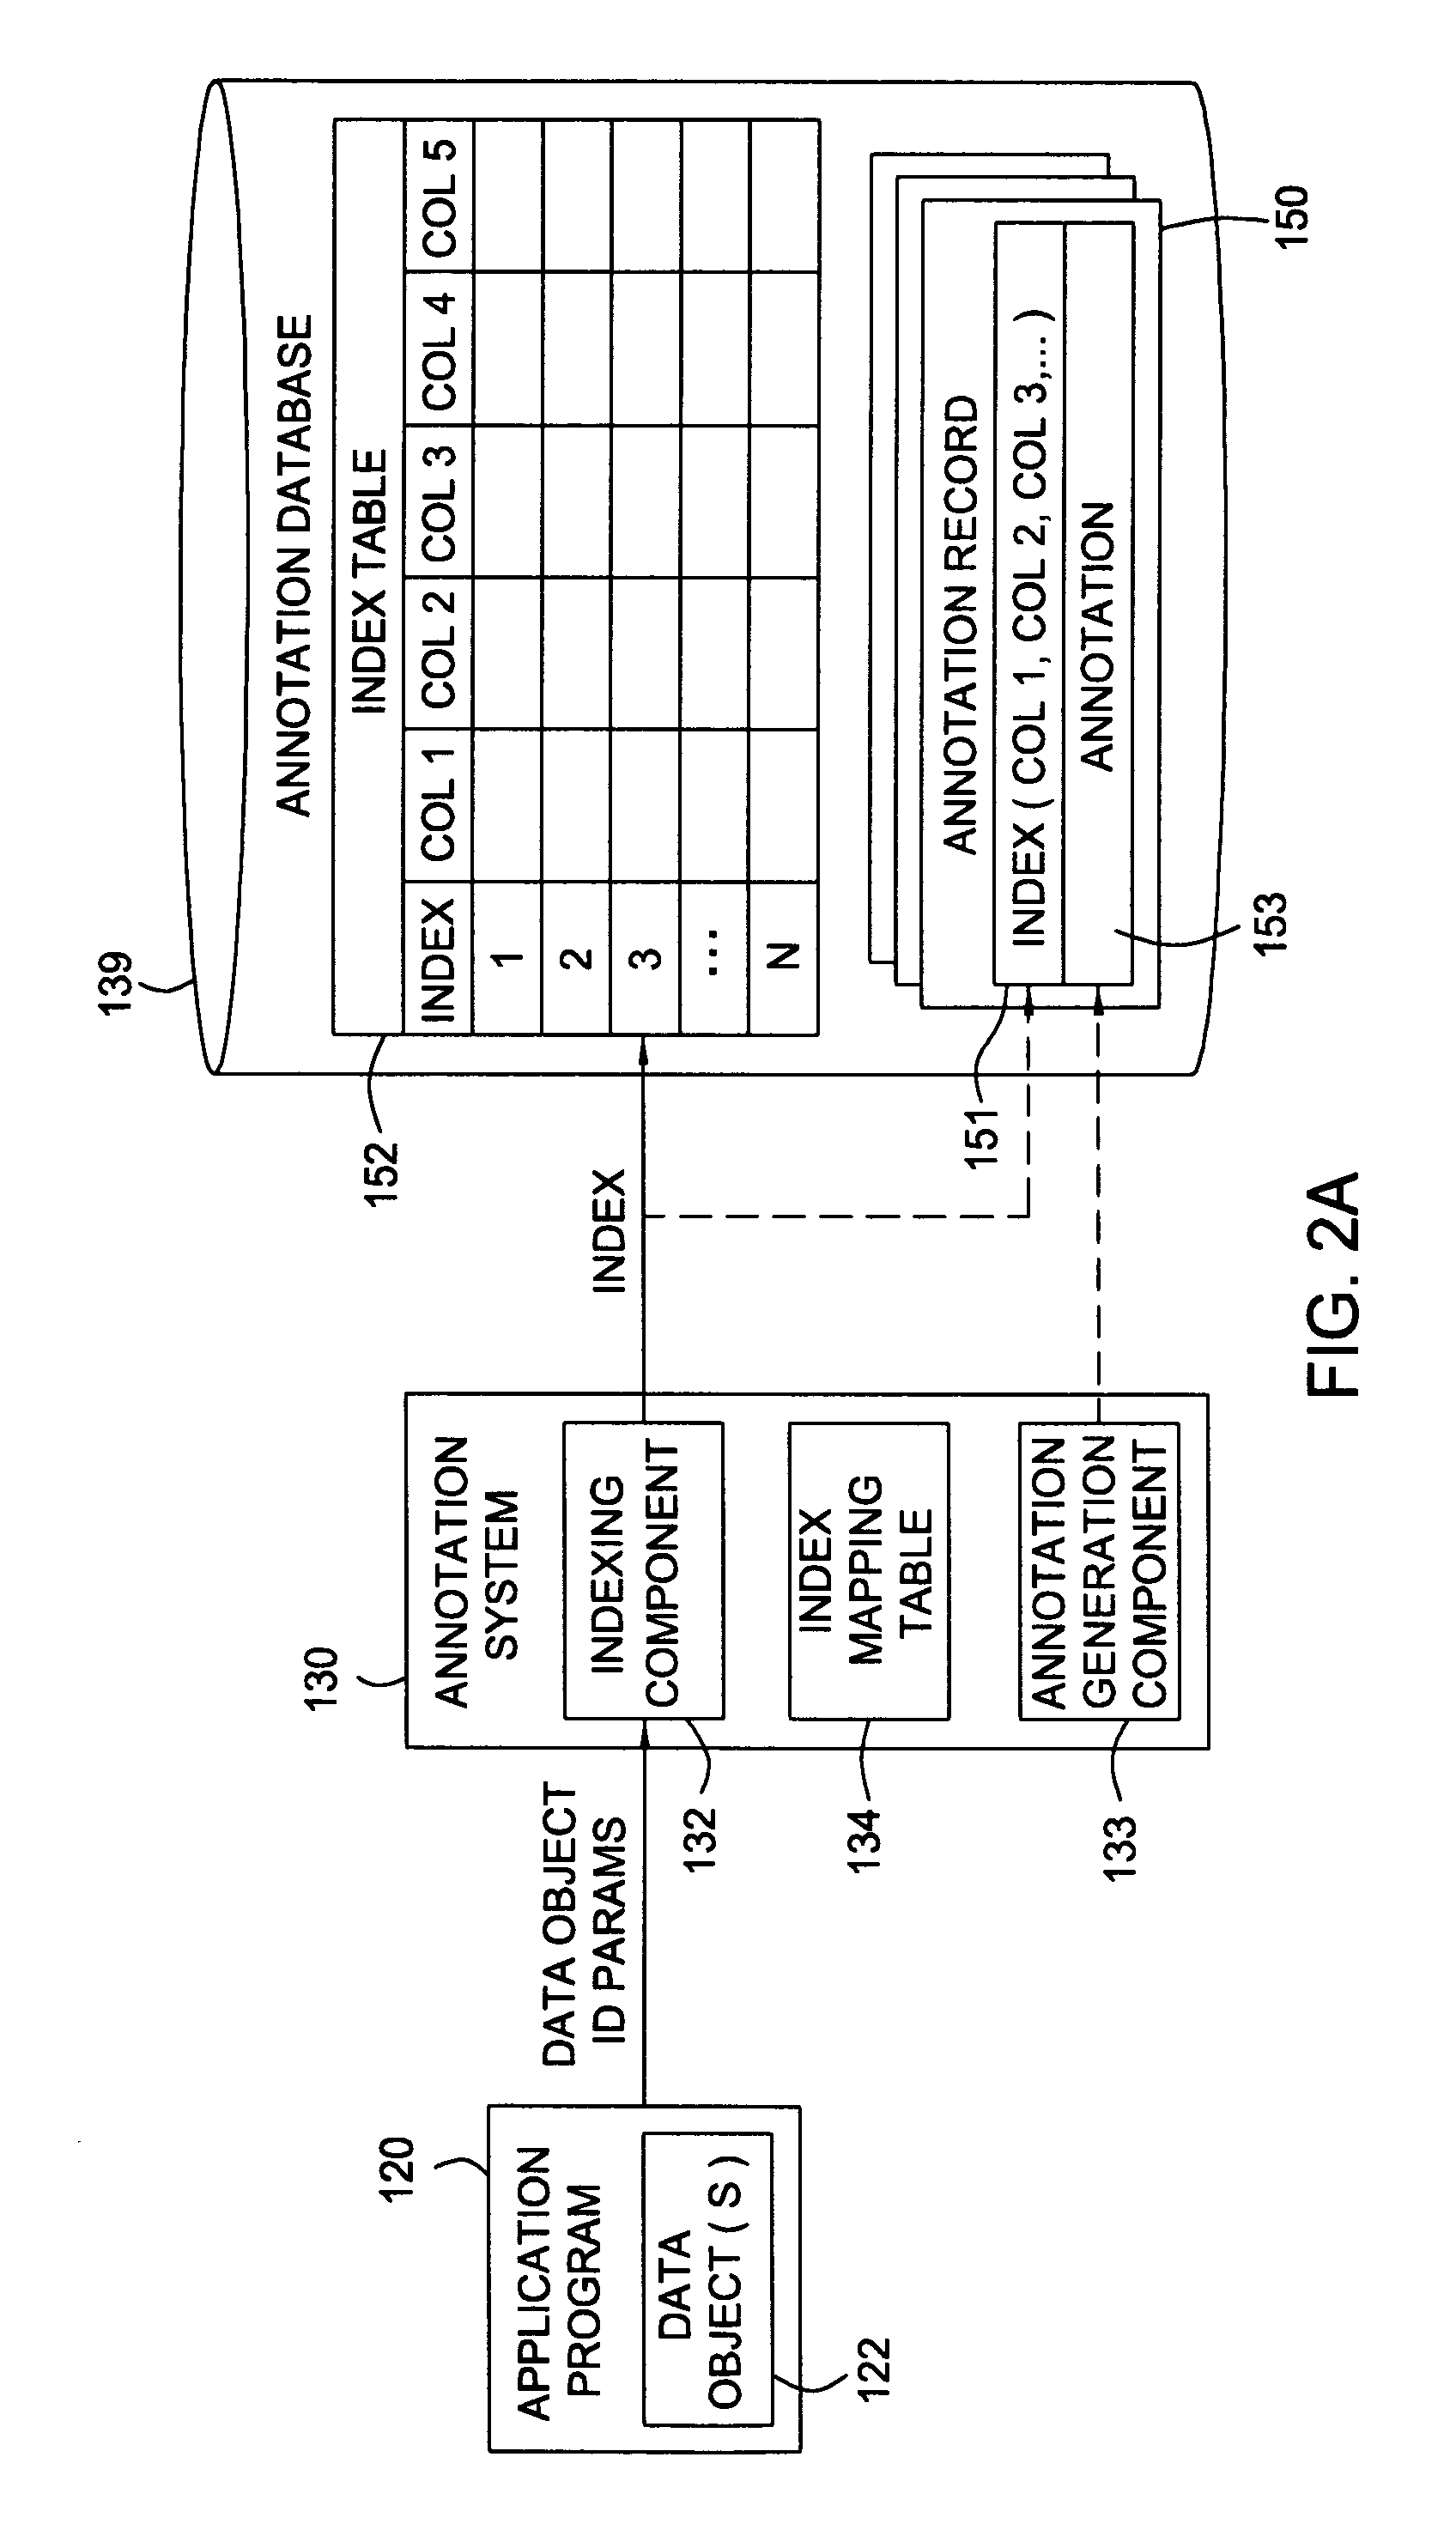 Heterogeneous multi-level extendable indexing for general purpose annotation systems